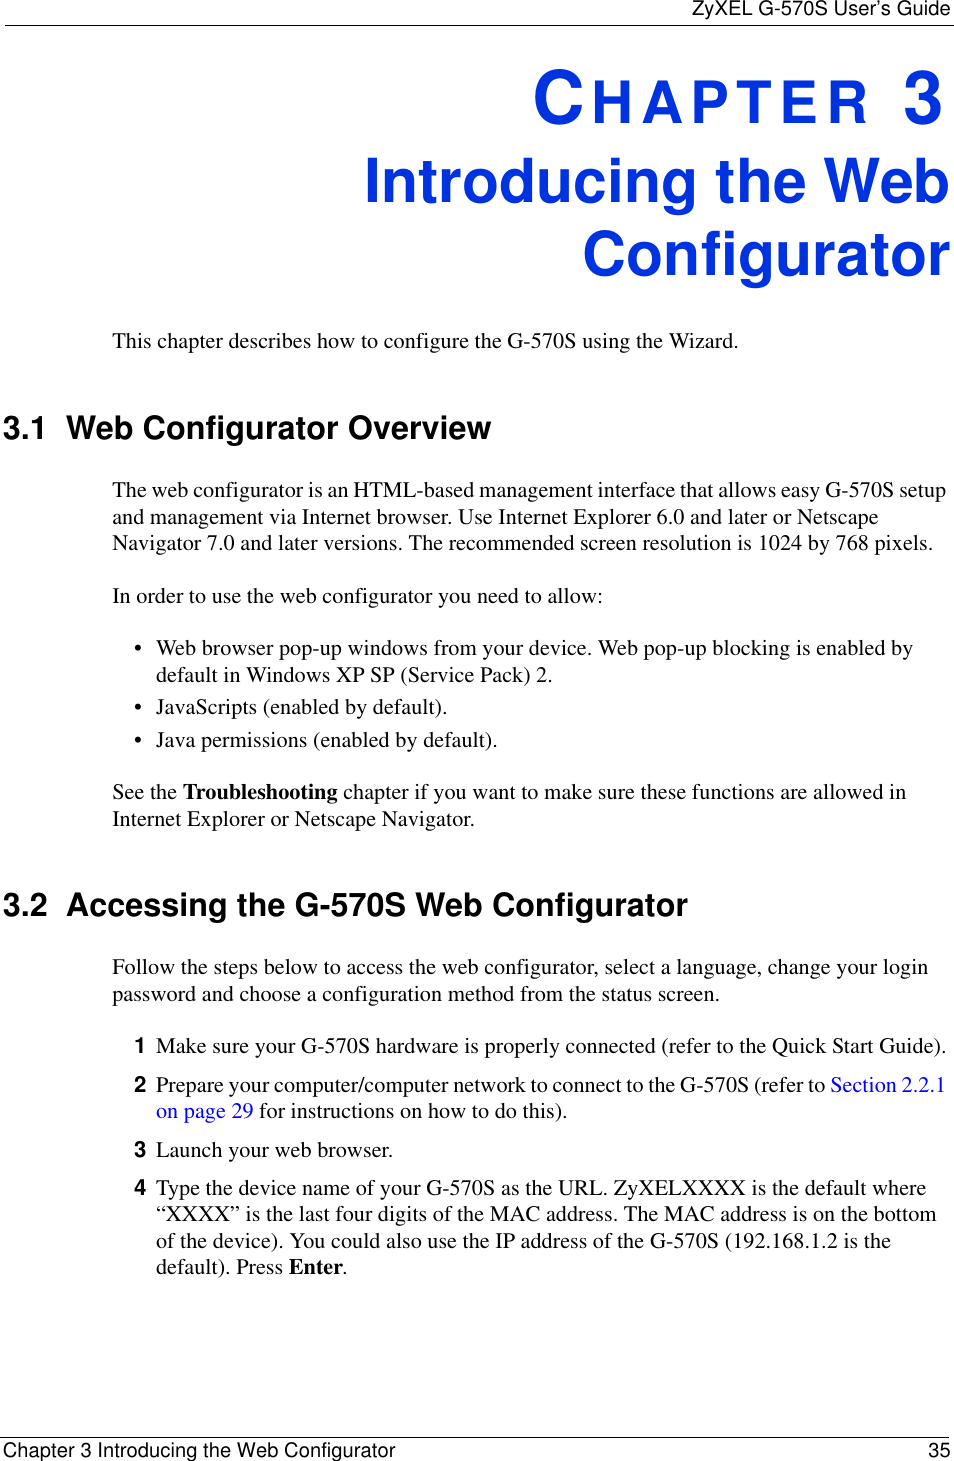 ZyXEL G-570S User’s GuideChapter 3 Introducing the Web Configurator 35CHAPTER 3Introducing the WebConfiguratorThis chapter describes how to configure the G-570S using the Wizard.3.1  Web Configurator OverviewThe web configurator is an HTML-based management interface that allows easy G-570S setup and management via Internet browser. Use Internet Explorer 6.0 and later or Netscape Navigator 7.0 and later versions. The recommended screen resolution is 1024 by 768 pixels.In order to use the web configurator you need to allow:• Web browser pop-up windows from your device. Web pop-up blocking is enabled by default in Windows XP SP (Service Pack) 2.• JavaScripts (enabled by default).• Java permissions (enabled by default).See the Troubleshooting chapter if you want to make sure these functions are allowed in Internet Explorer or Netscape Navigator. 3.2  Accessing the G-570S Web ConfiguratorFollow the steps below to access the web configurator, select a language, change your login password and choose a configuration method from the status screen. 1Make sure your G-570S hardware is properly connected (refer to the Quick Start Guide).2Prepare your computer/computer network to connect to the G-570S (refer to Section 2.2.1 on page 29 for instructions on how to do this).3Launch your web browser.4Type the device name of your G-570S as the URL. ZyXELXXXX is the default where “XXXX” is the last four digits of the MAC address. The MAC address is on the bottom of the device). You could also use the IP address of the G-570S (192.168.1.2 is the default). Press Enter.